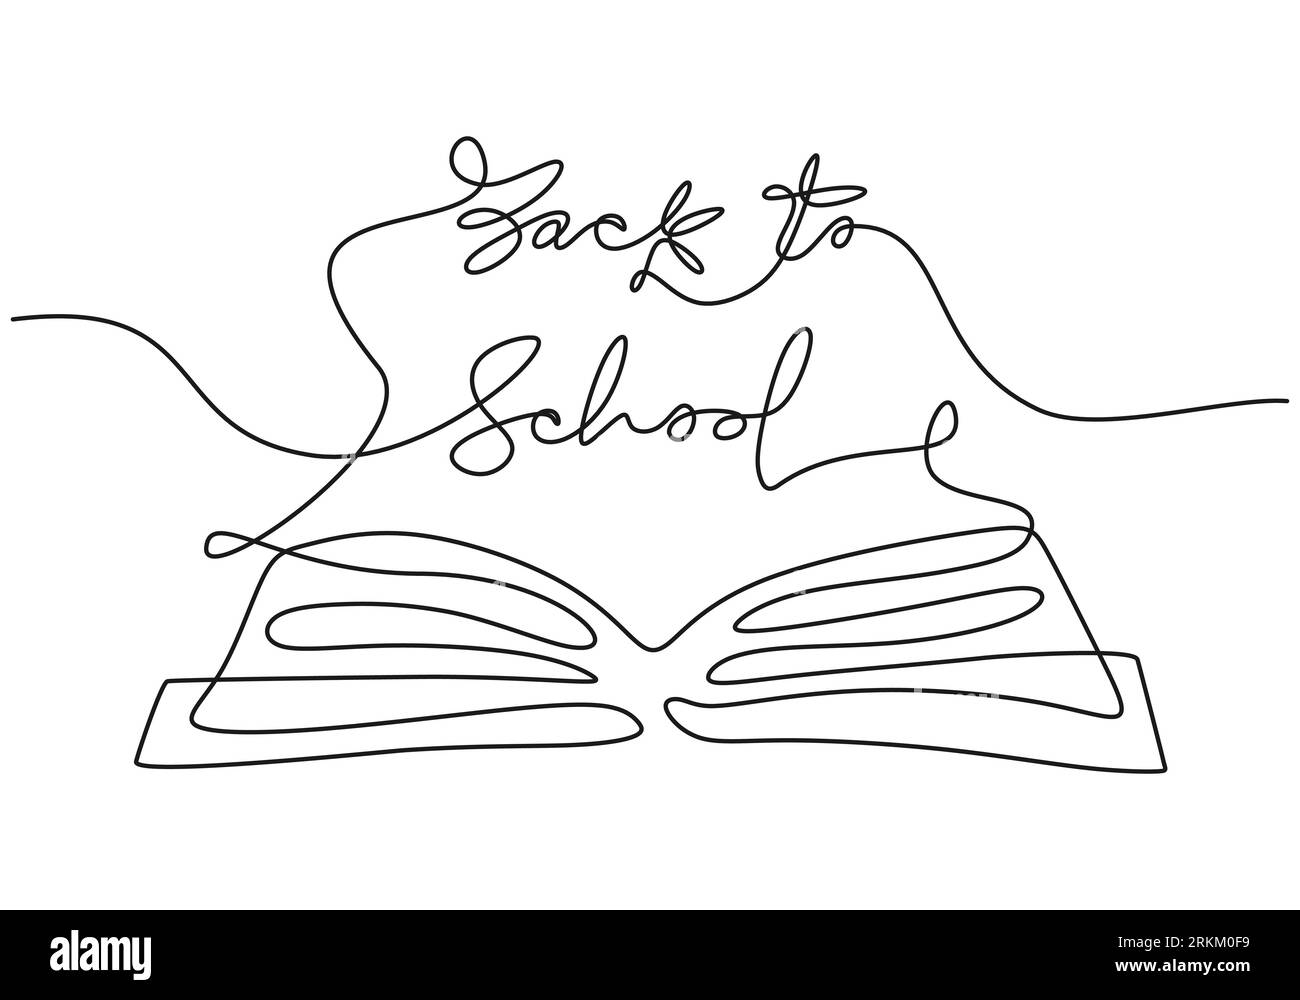 Continuous one line drawing of back to school handwritten words with opened book isolated on white background. Stock Vector